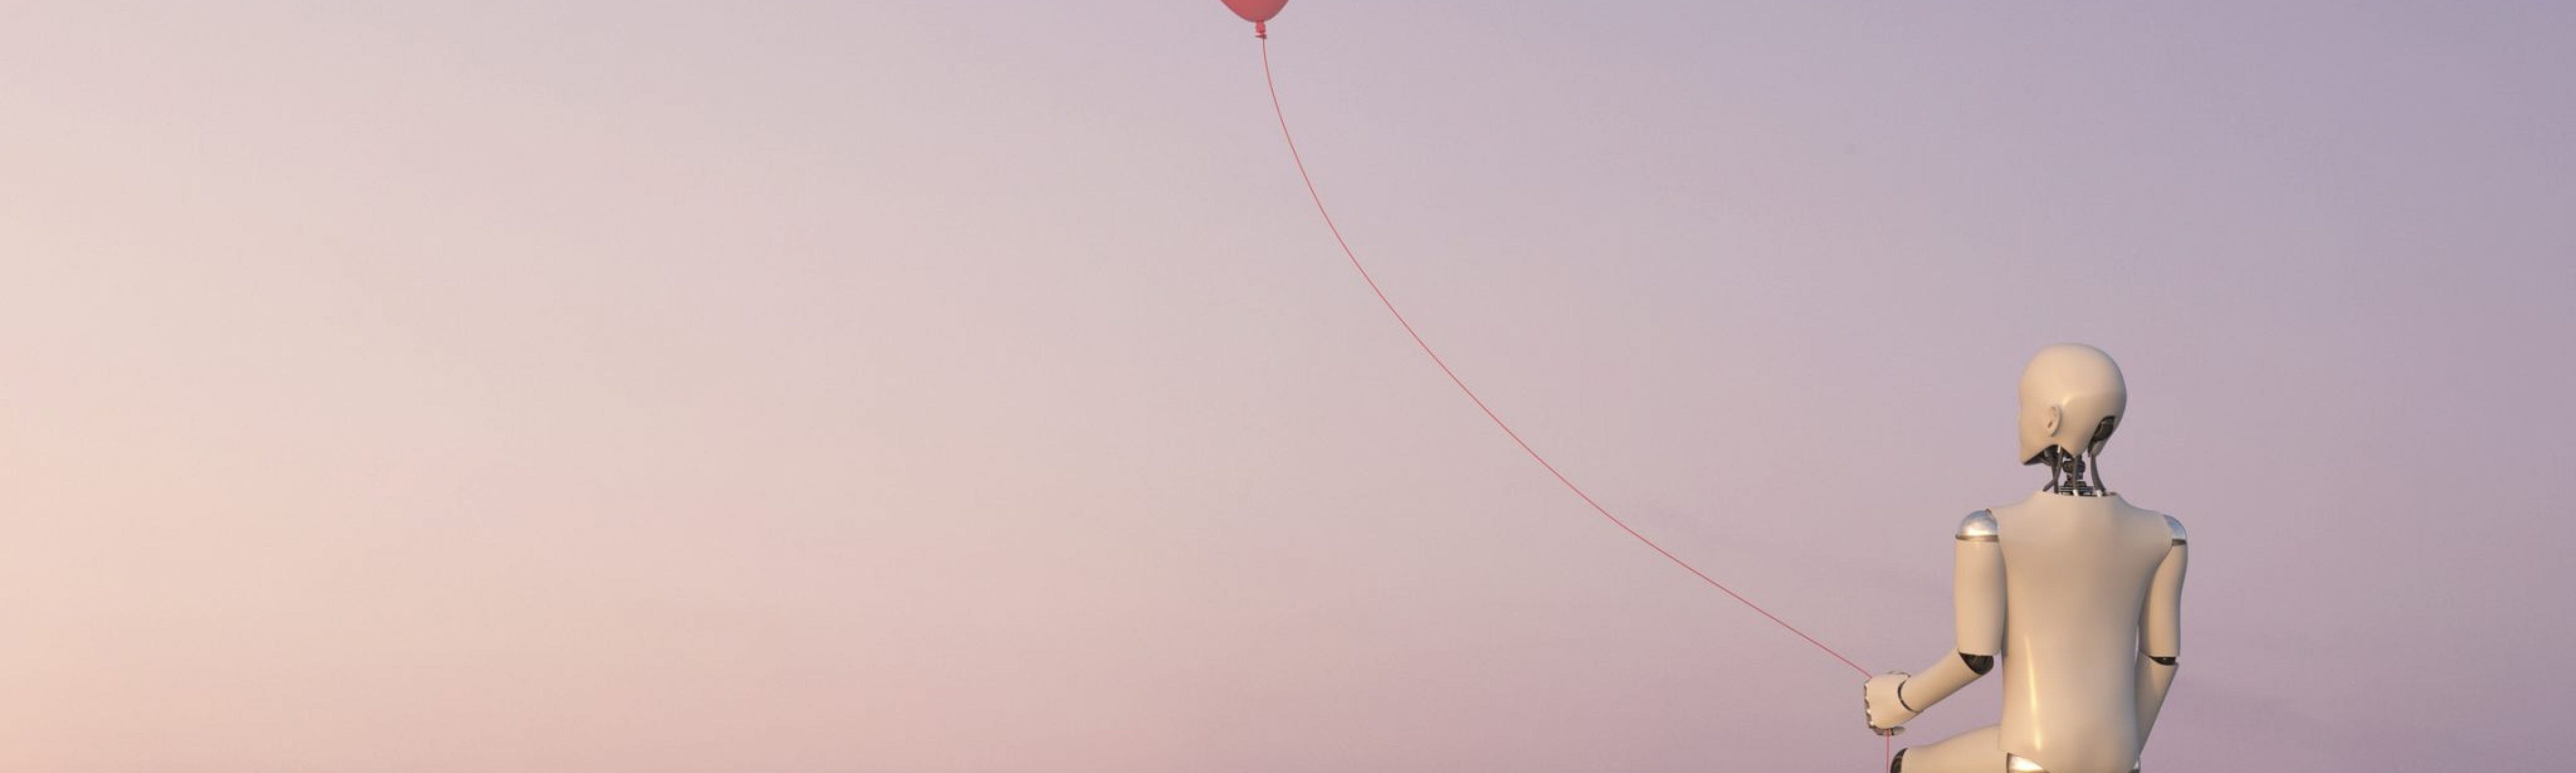 A white robot is sitting on the rooftop ledge of a building with the view of a city with lights, holding a red balloon. Business Impact article on Top tips to be a better daydreamer — and how it will help you.